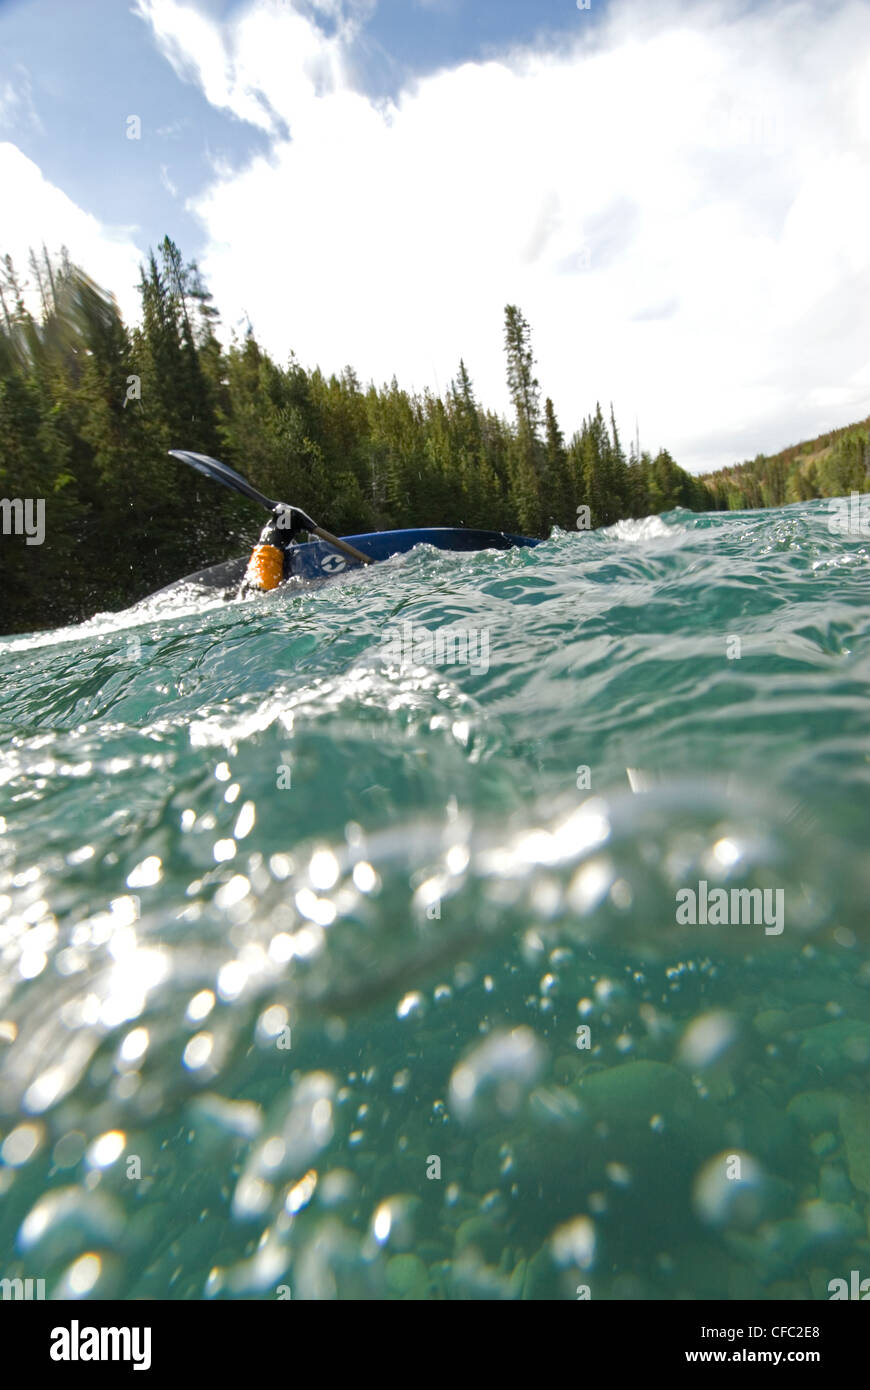 A kayaker tries to stay upright on the Chilko RIver, British Columbia, Canada Stock Photo